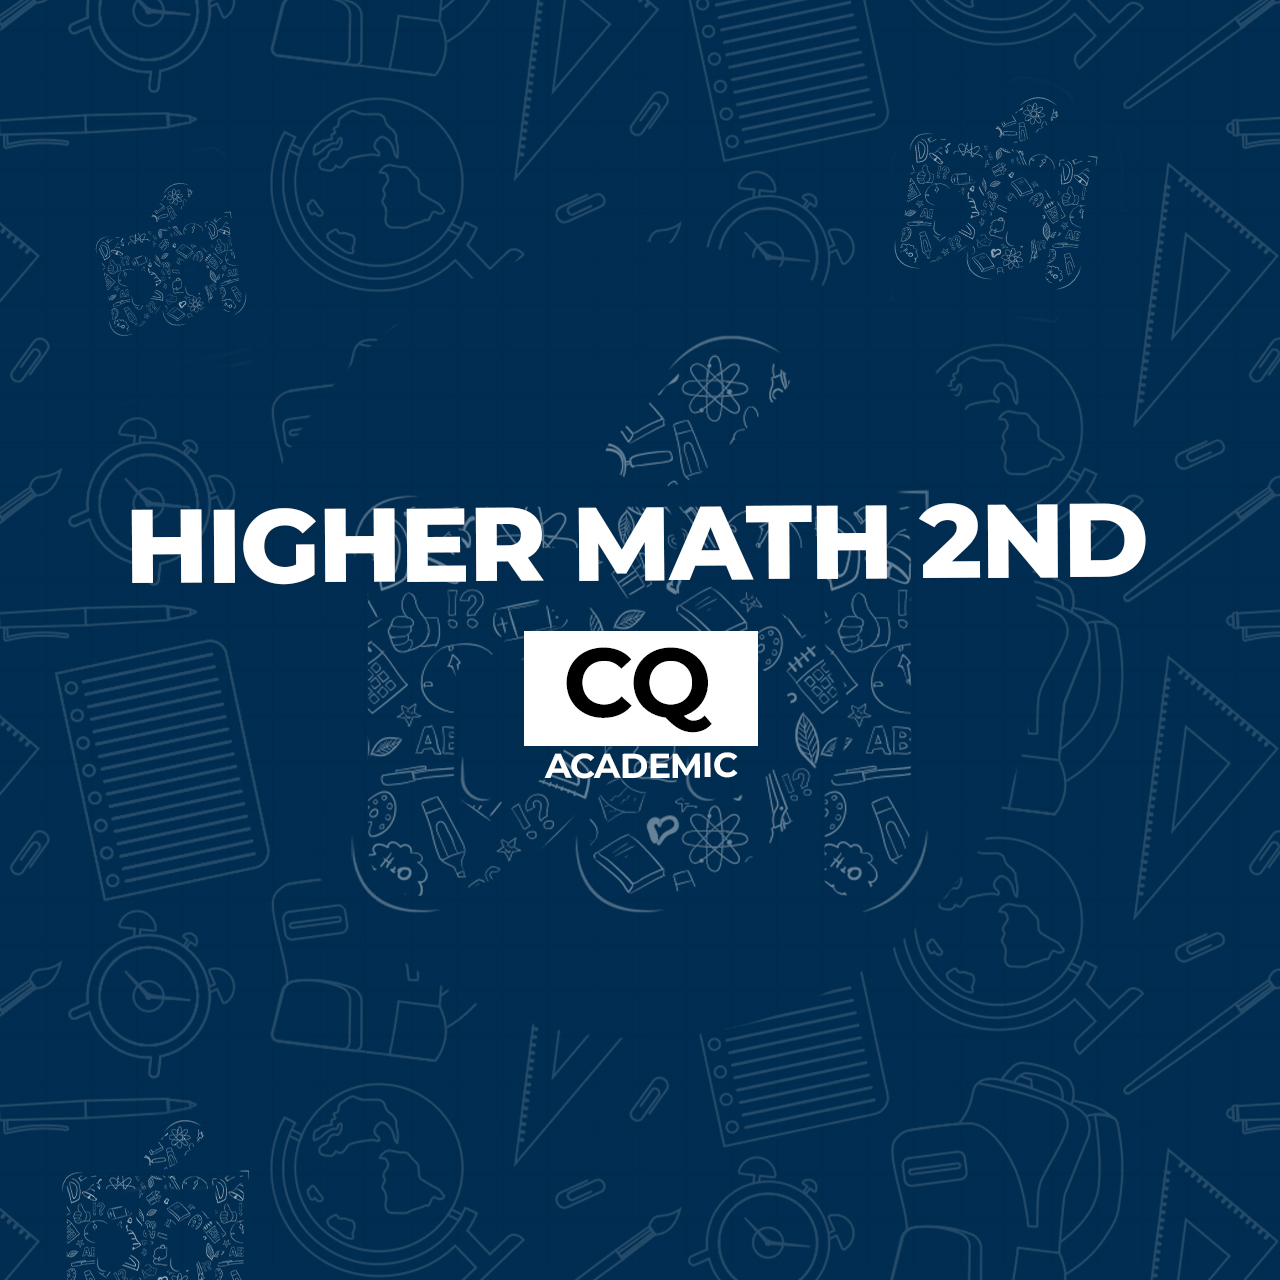 <p>HSC Higher Math 2nd Paper Digital Test Paper In this digital test paper, you will find all the board questions from the Higher Math 2nd Paper from 2017 to 2023 for all boards. Practice board CQ questions now on Chorcha to secure A+ in HSC exam and stay ahead in admission</p>